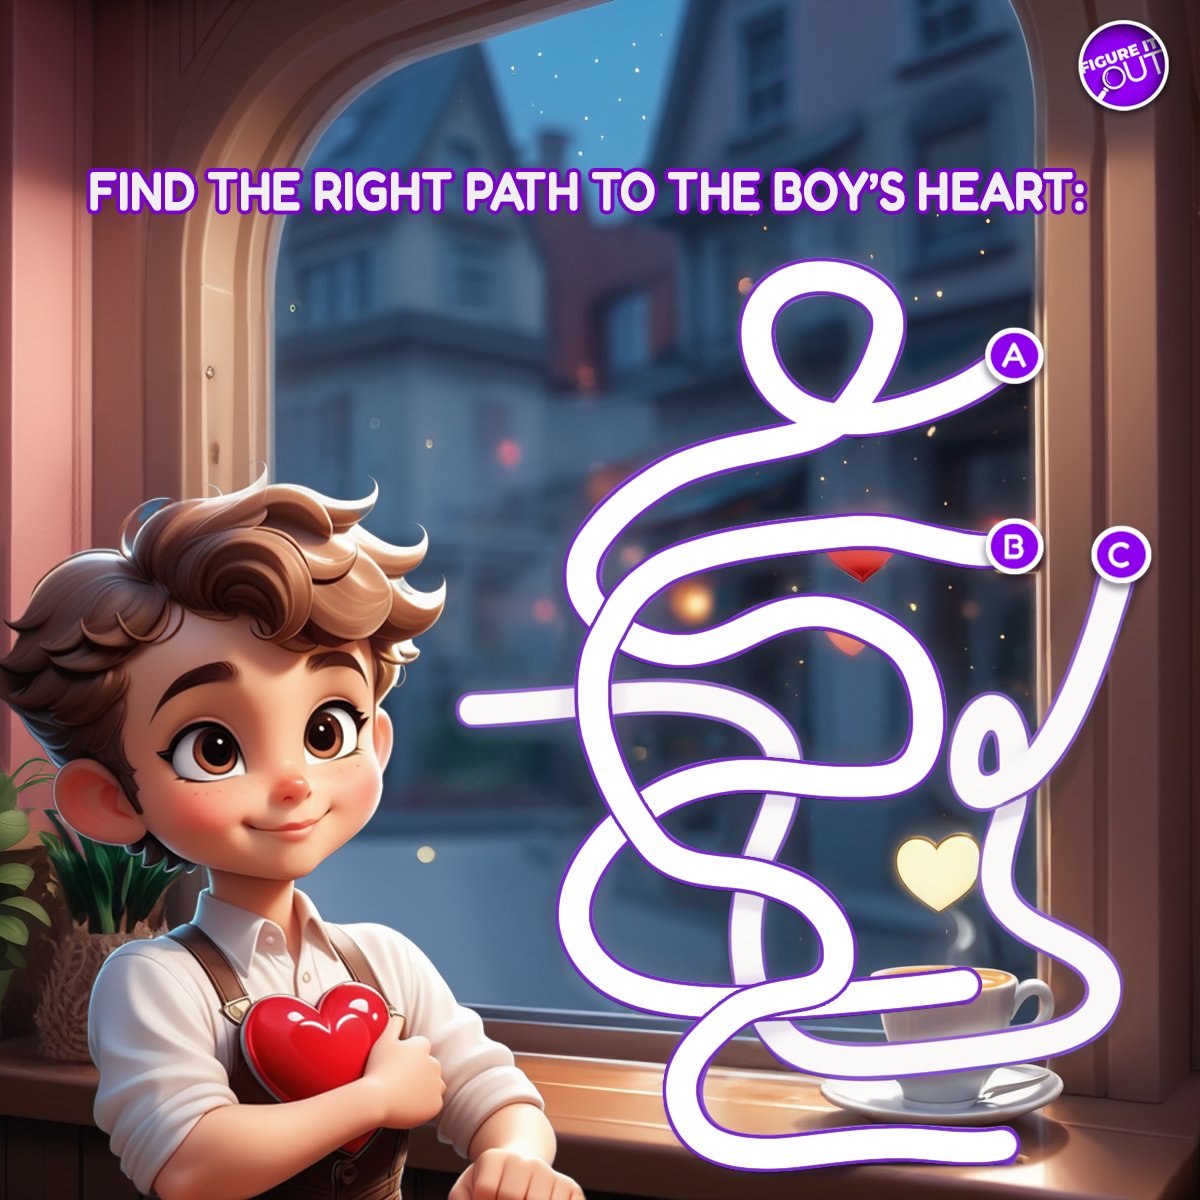 🔍❤️👦 Can you find the right path through the maze to the boy's heart? Navigate the twists and turns, and unlock the correct route for a chance to win heartfelt rewards! 💖🏆💸⬇️ 👉🏼 bg.onelink.me/2pGm/TWbio?bc=… 🔍❤️